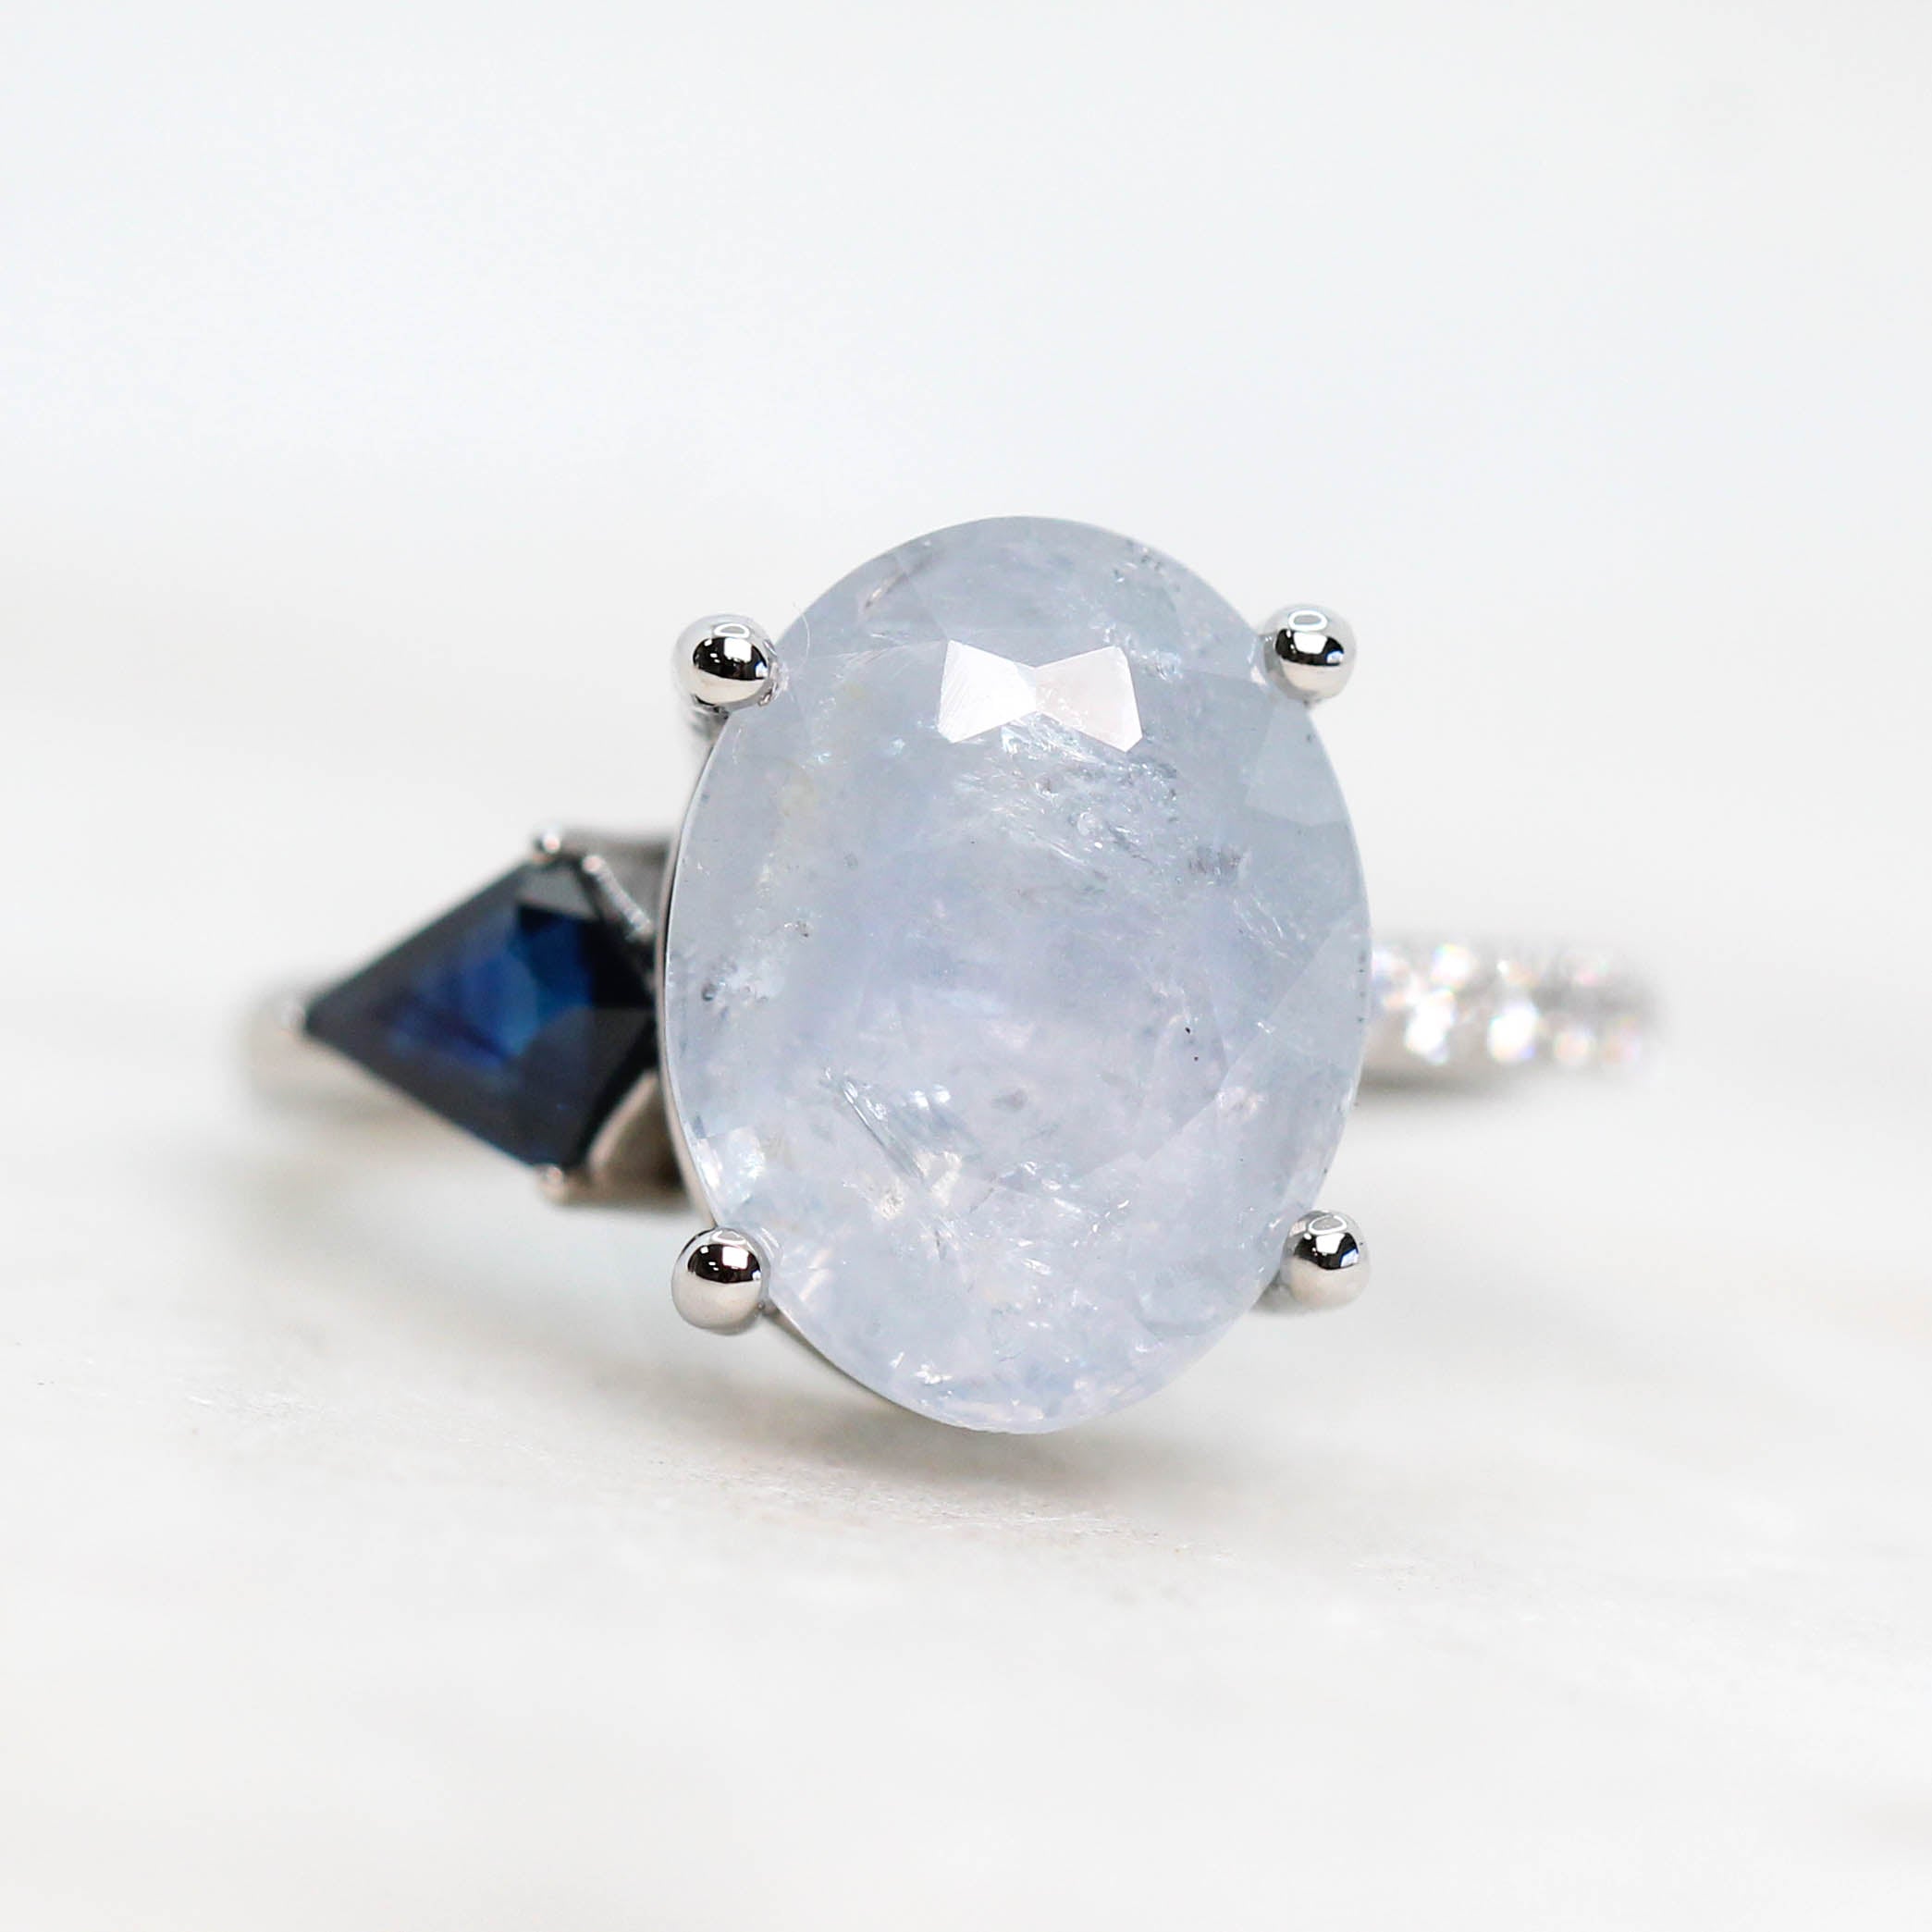 Zephyr Ring with a 6.62 Carat Light Blue Sapphire, Accent Sapphire and Accent Diamonds in 14k White Gold - Ready to Size and Ship - Midwinter Co. Alternative Bridal Rings and Modern Fine Jewelry